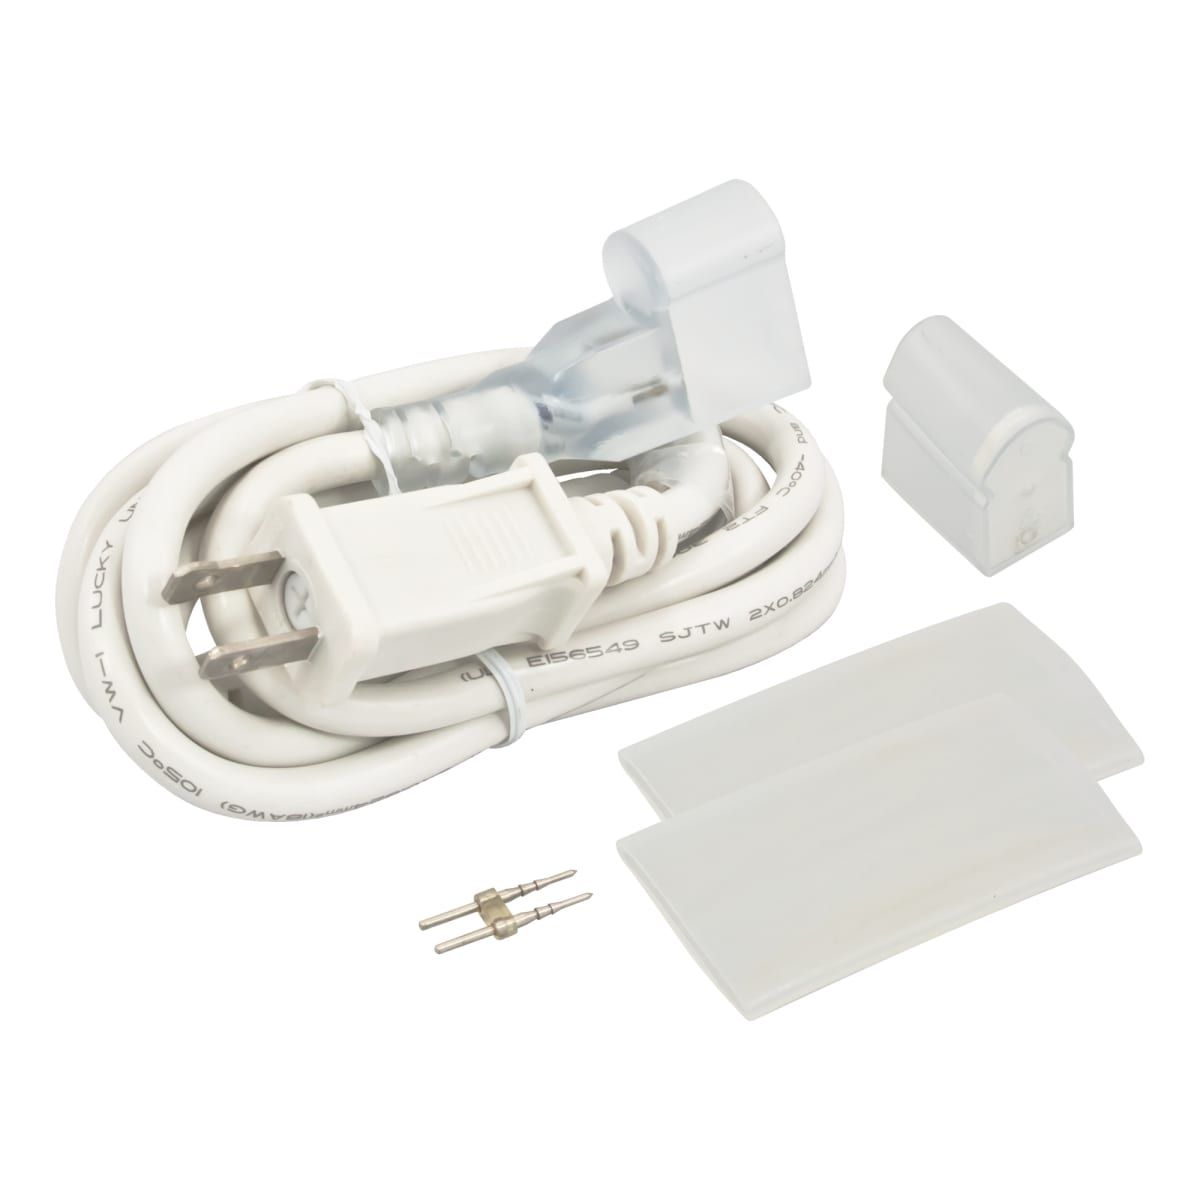 Hybrid 2 5 ft Power Connection Kit with Plug, 120V - Bees Lighting